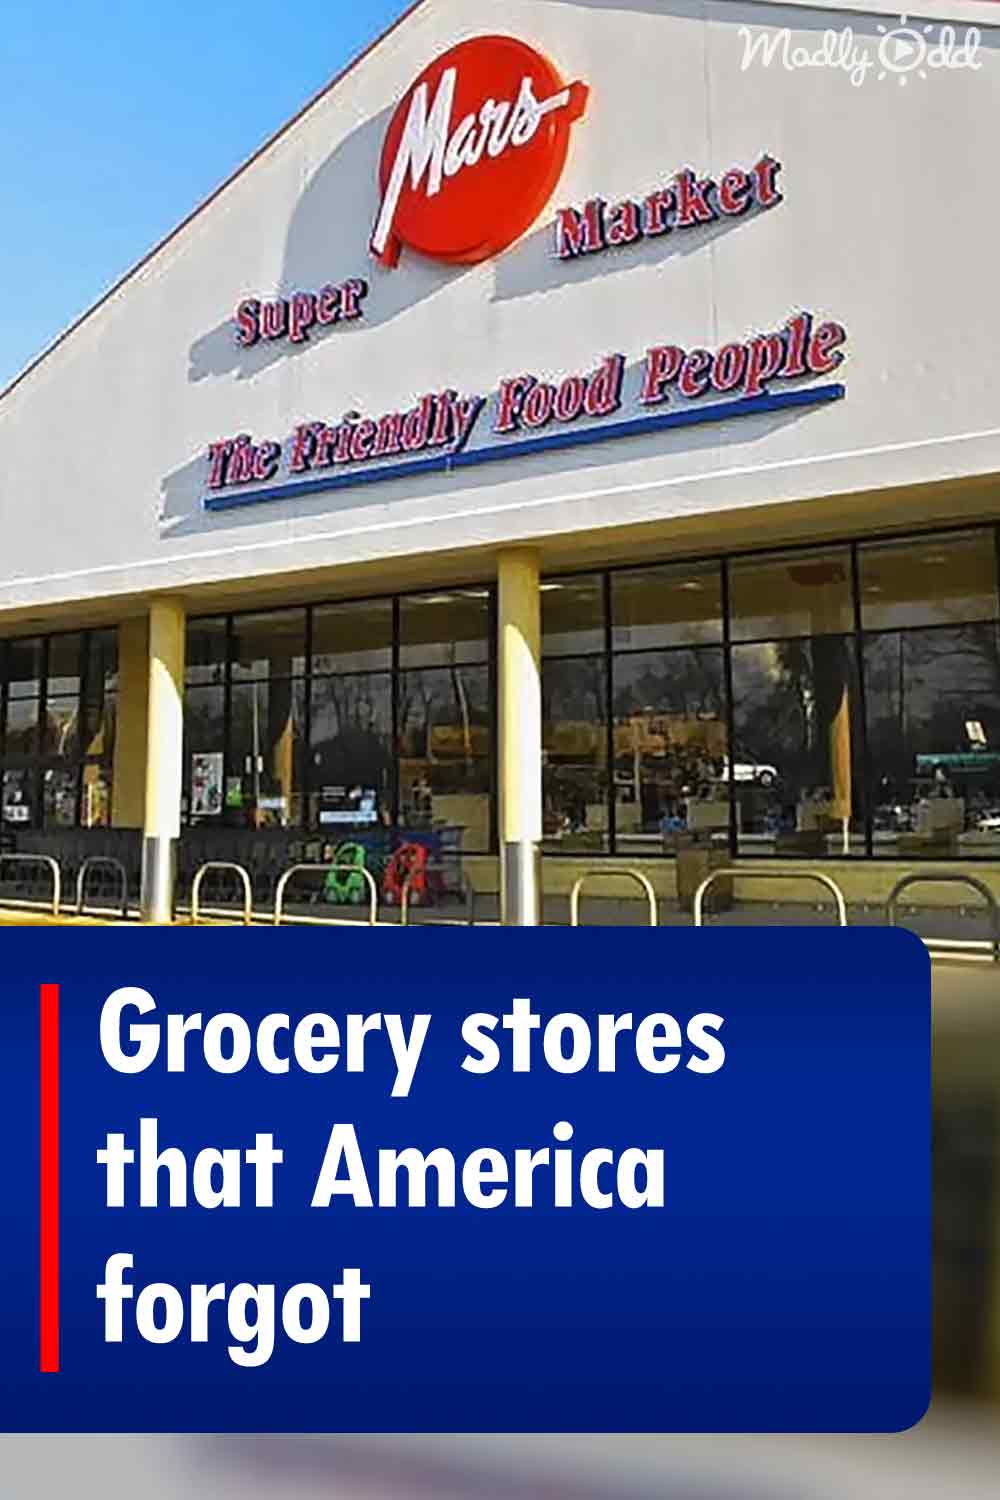 Grocery stores that America forgot